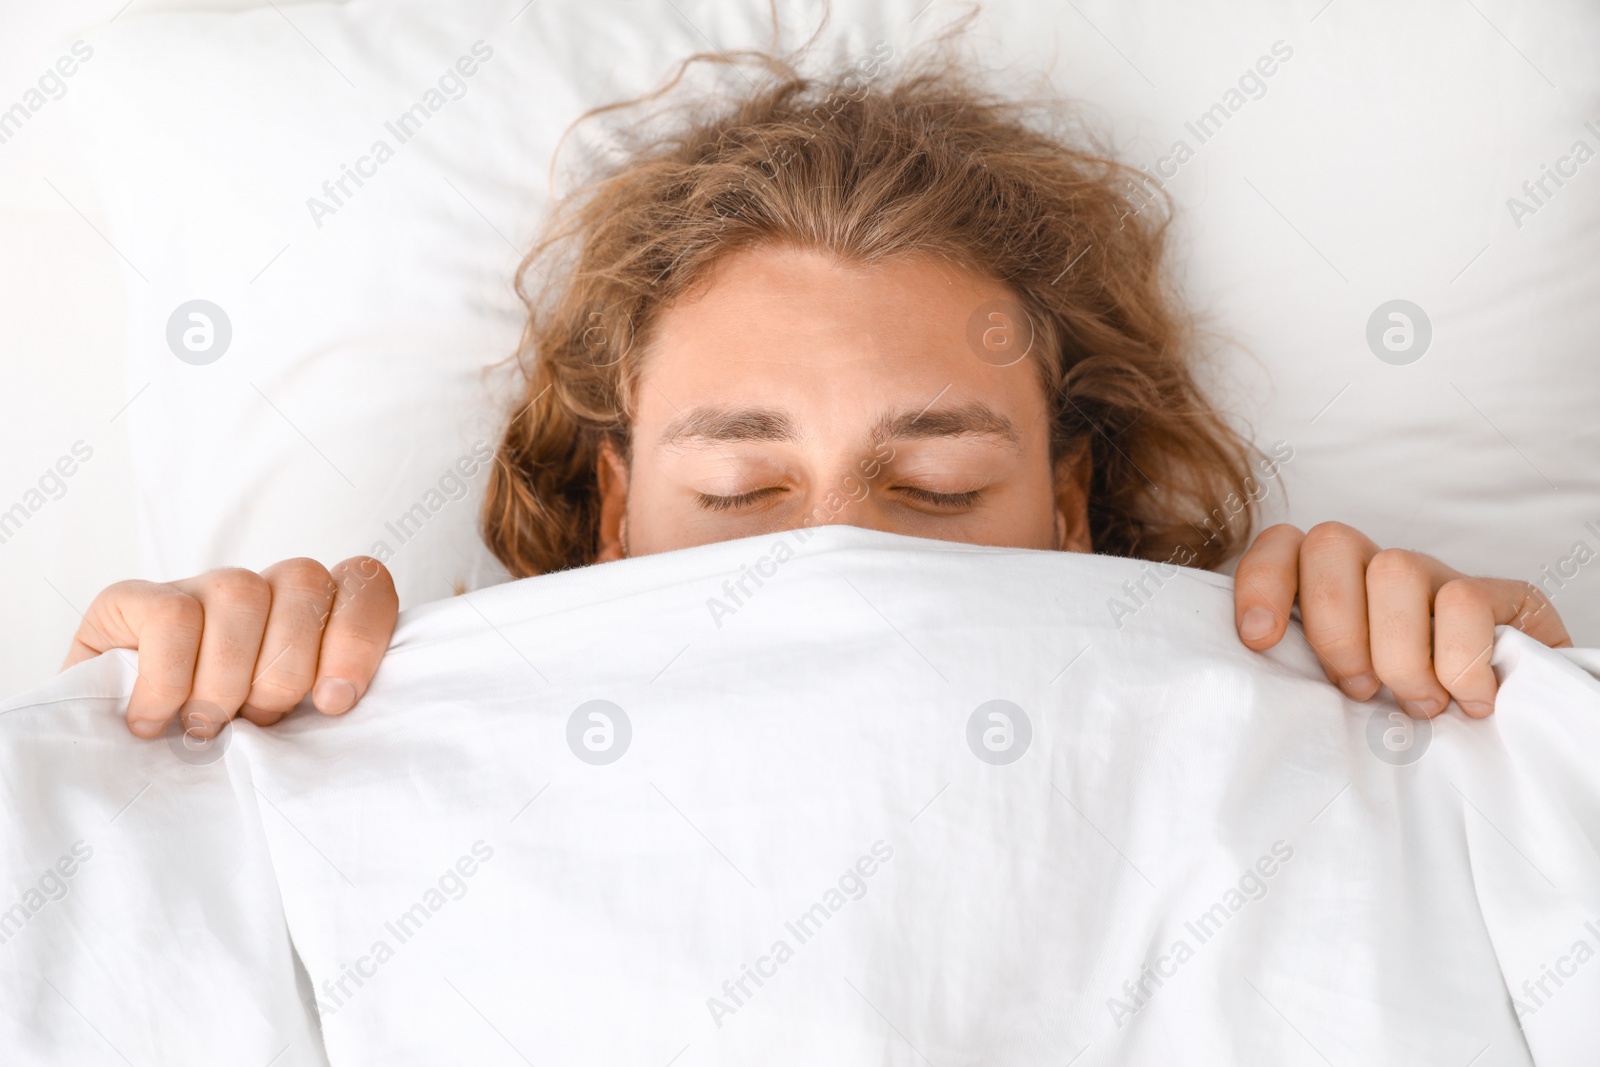 Photo of Young man covering his face with blanket while sleeping on pillow, top view. Bedtime